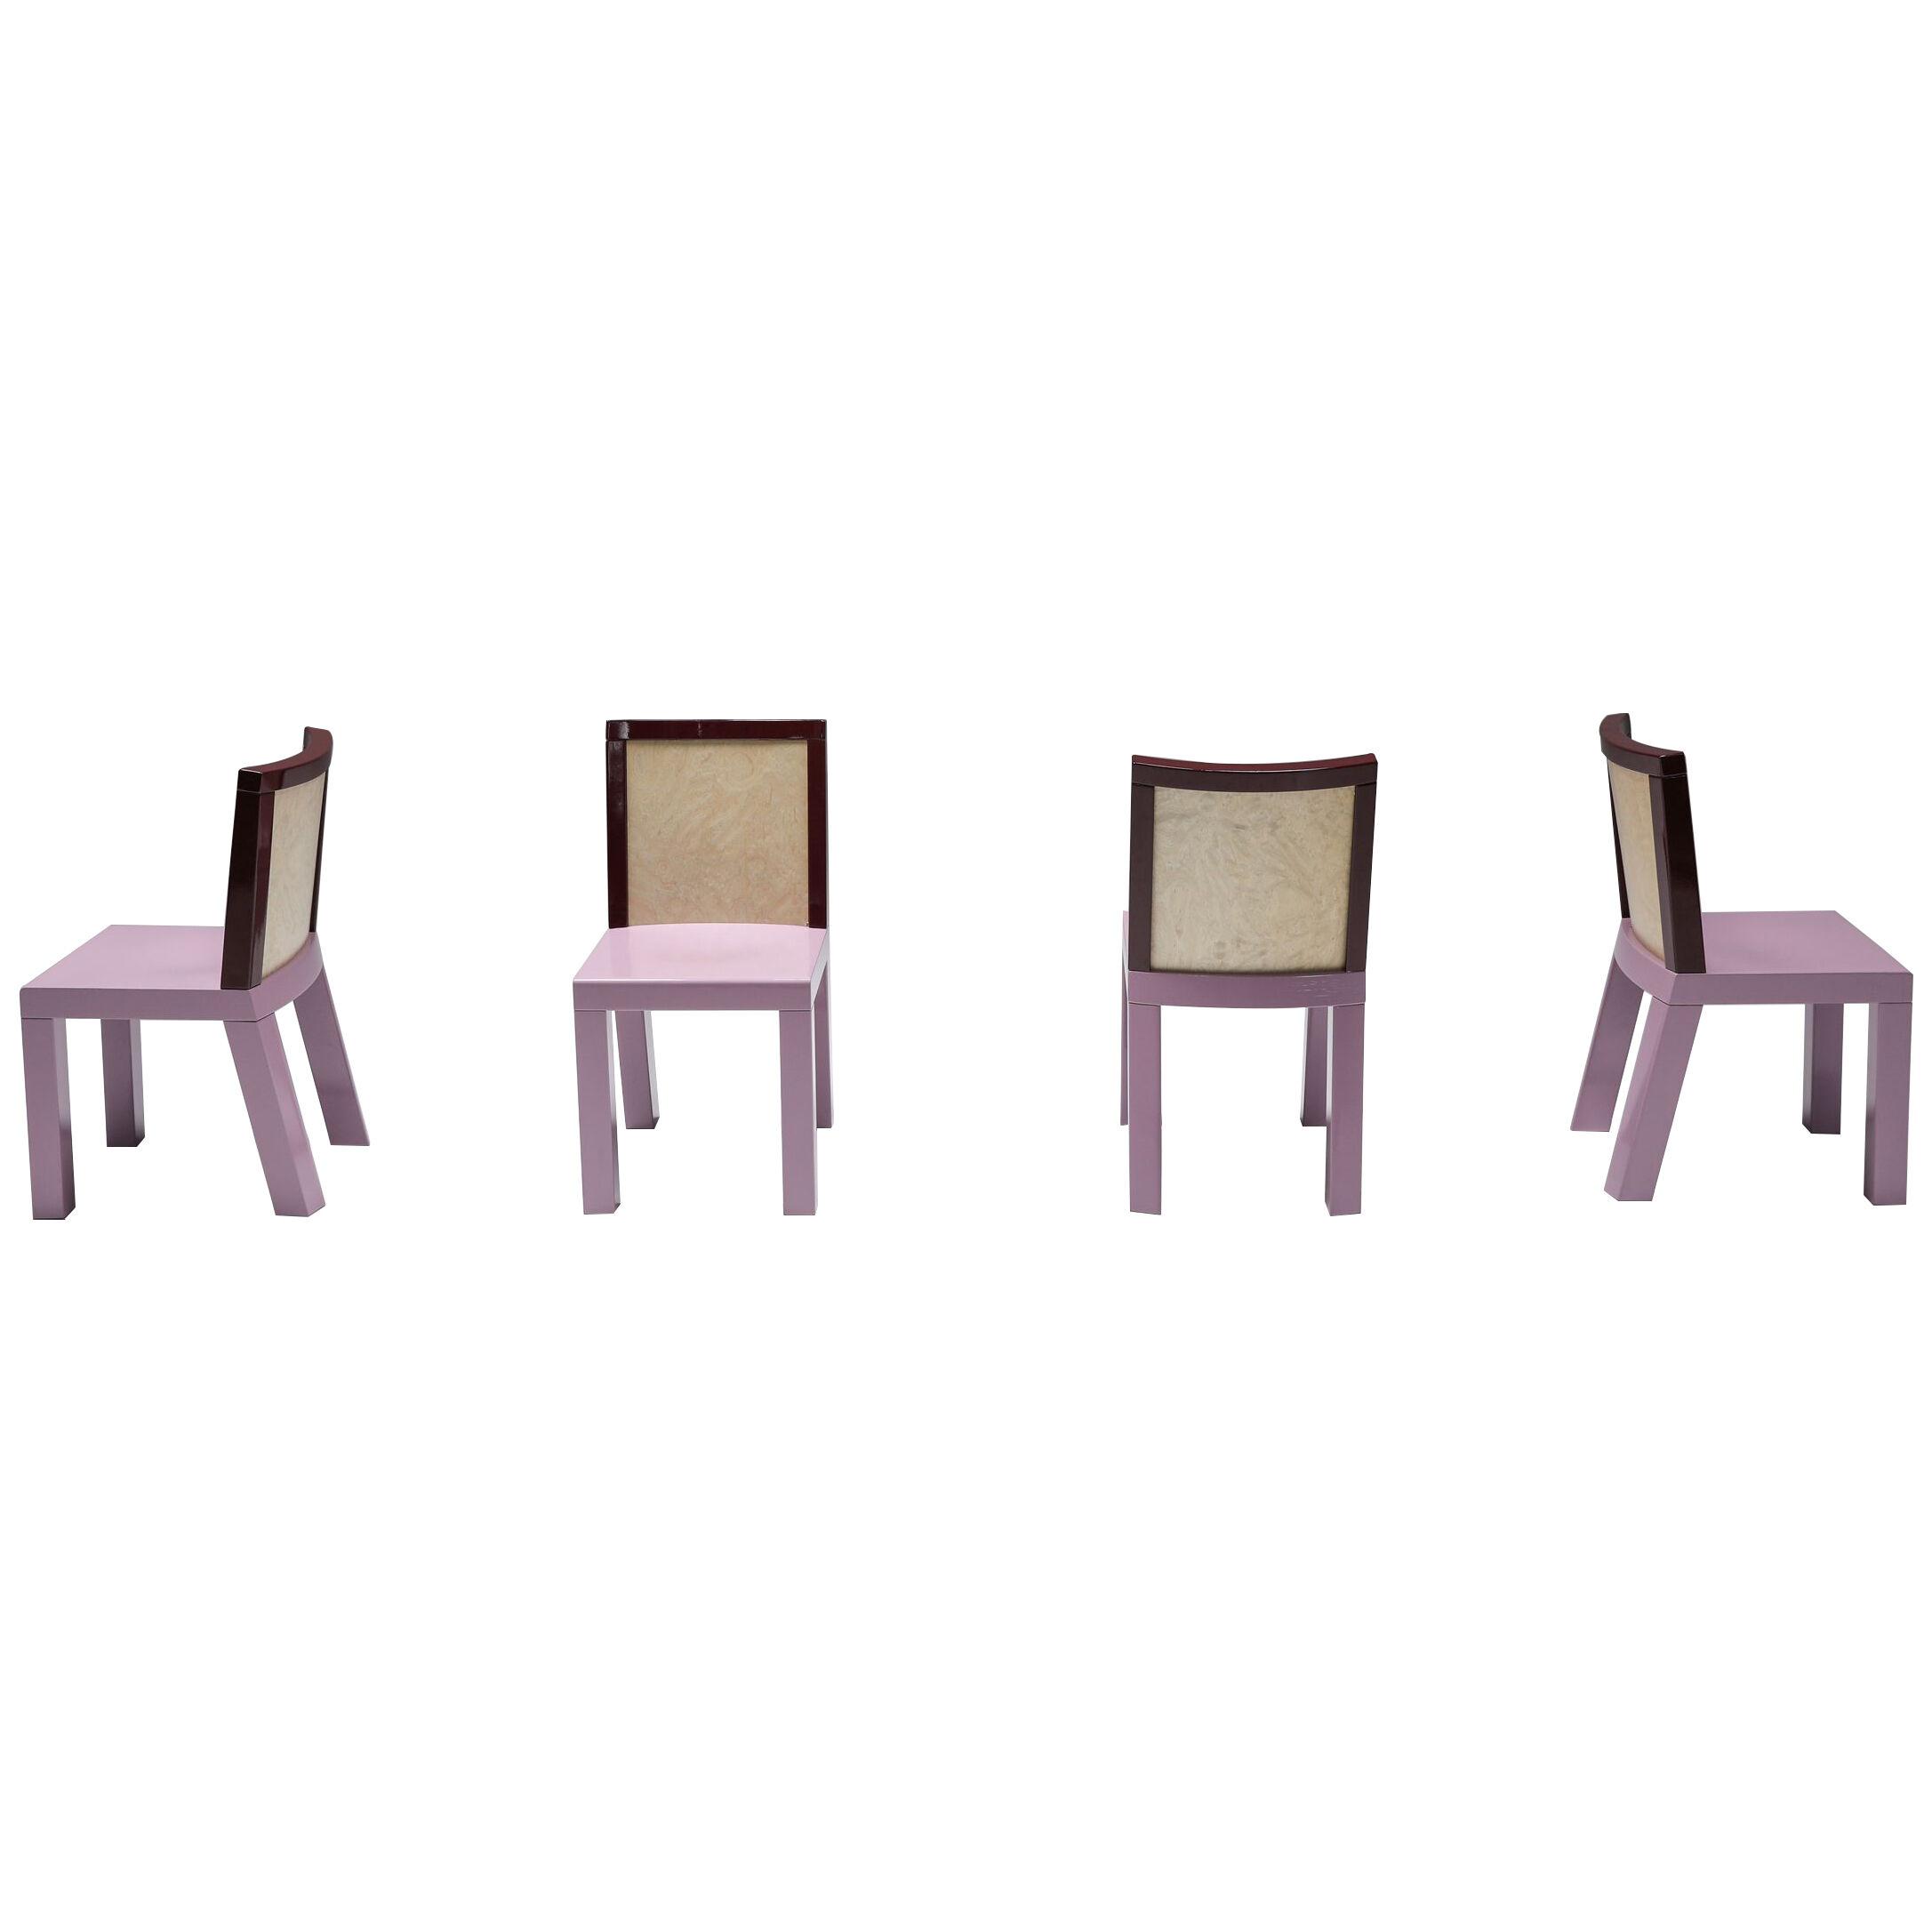  Postmodern Ettore Sottsass Pink Dining Chairs for Leitner - 1980's